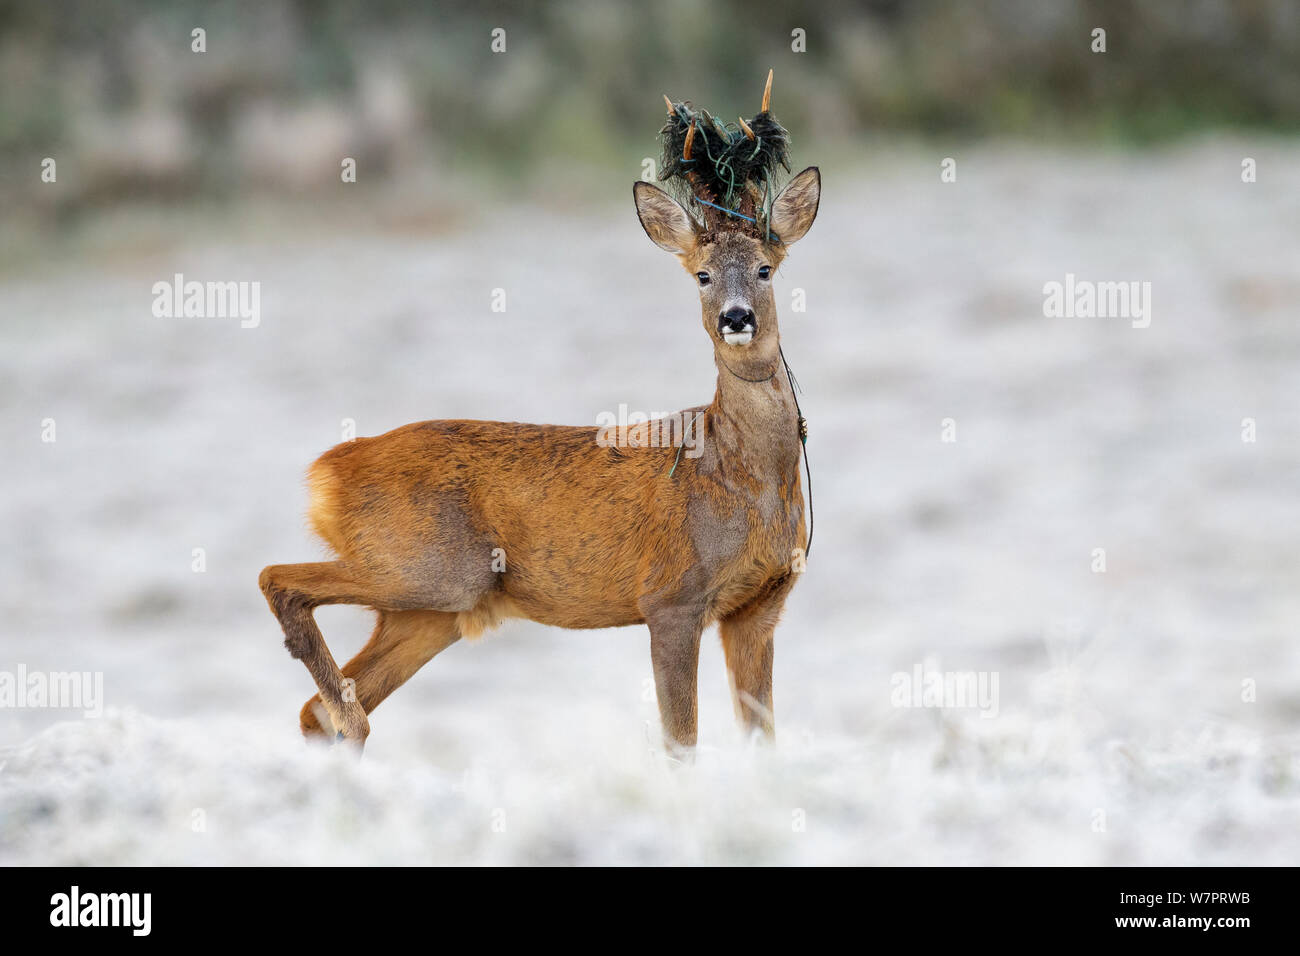 Roe deer (Capreolus capreolus) buck with fishing net tangled in antlers, standing in frost covered field. Southern Norway, September. Stock Photo